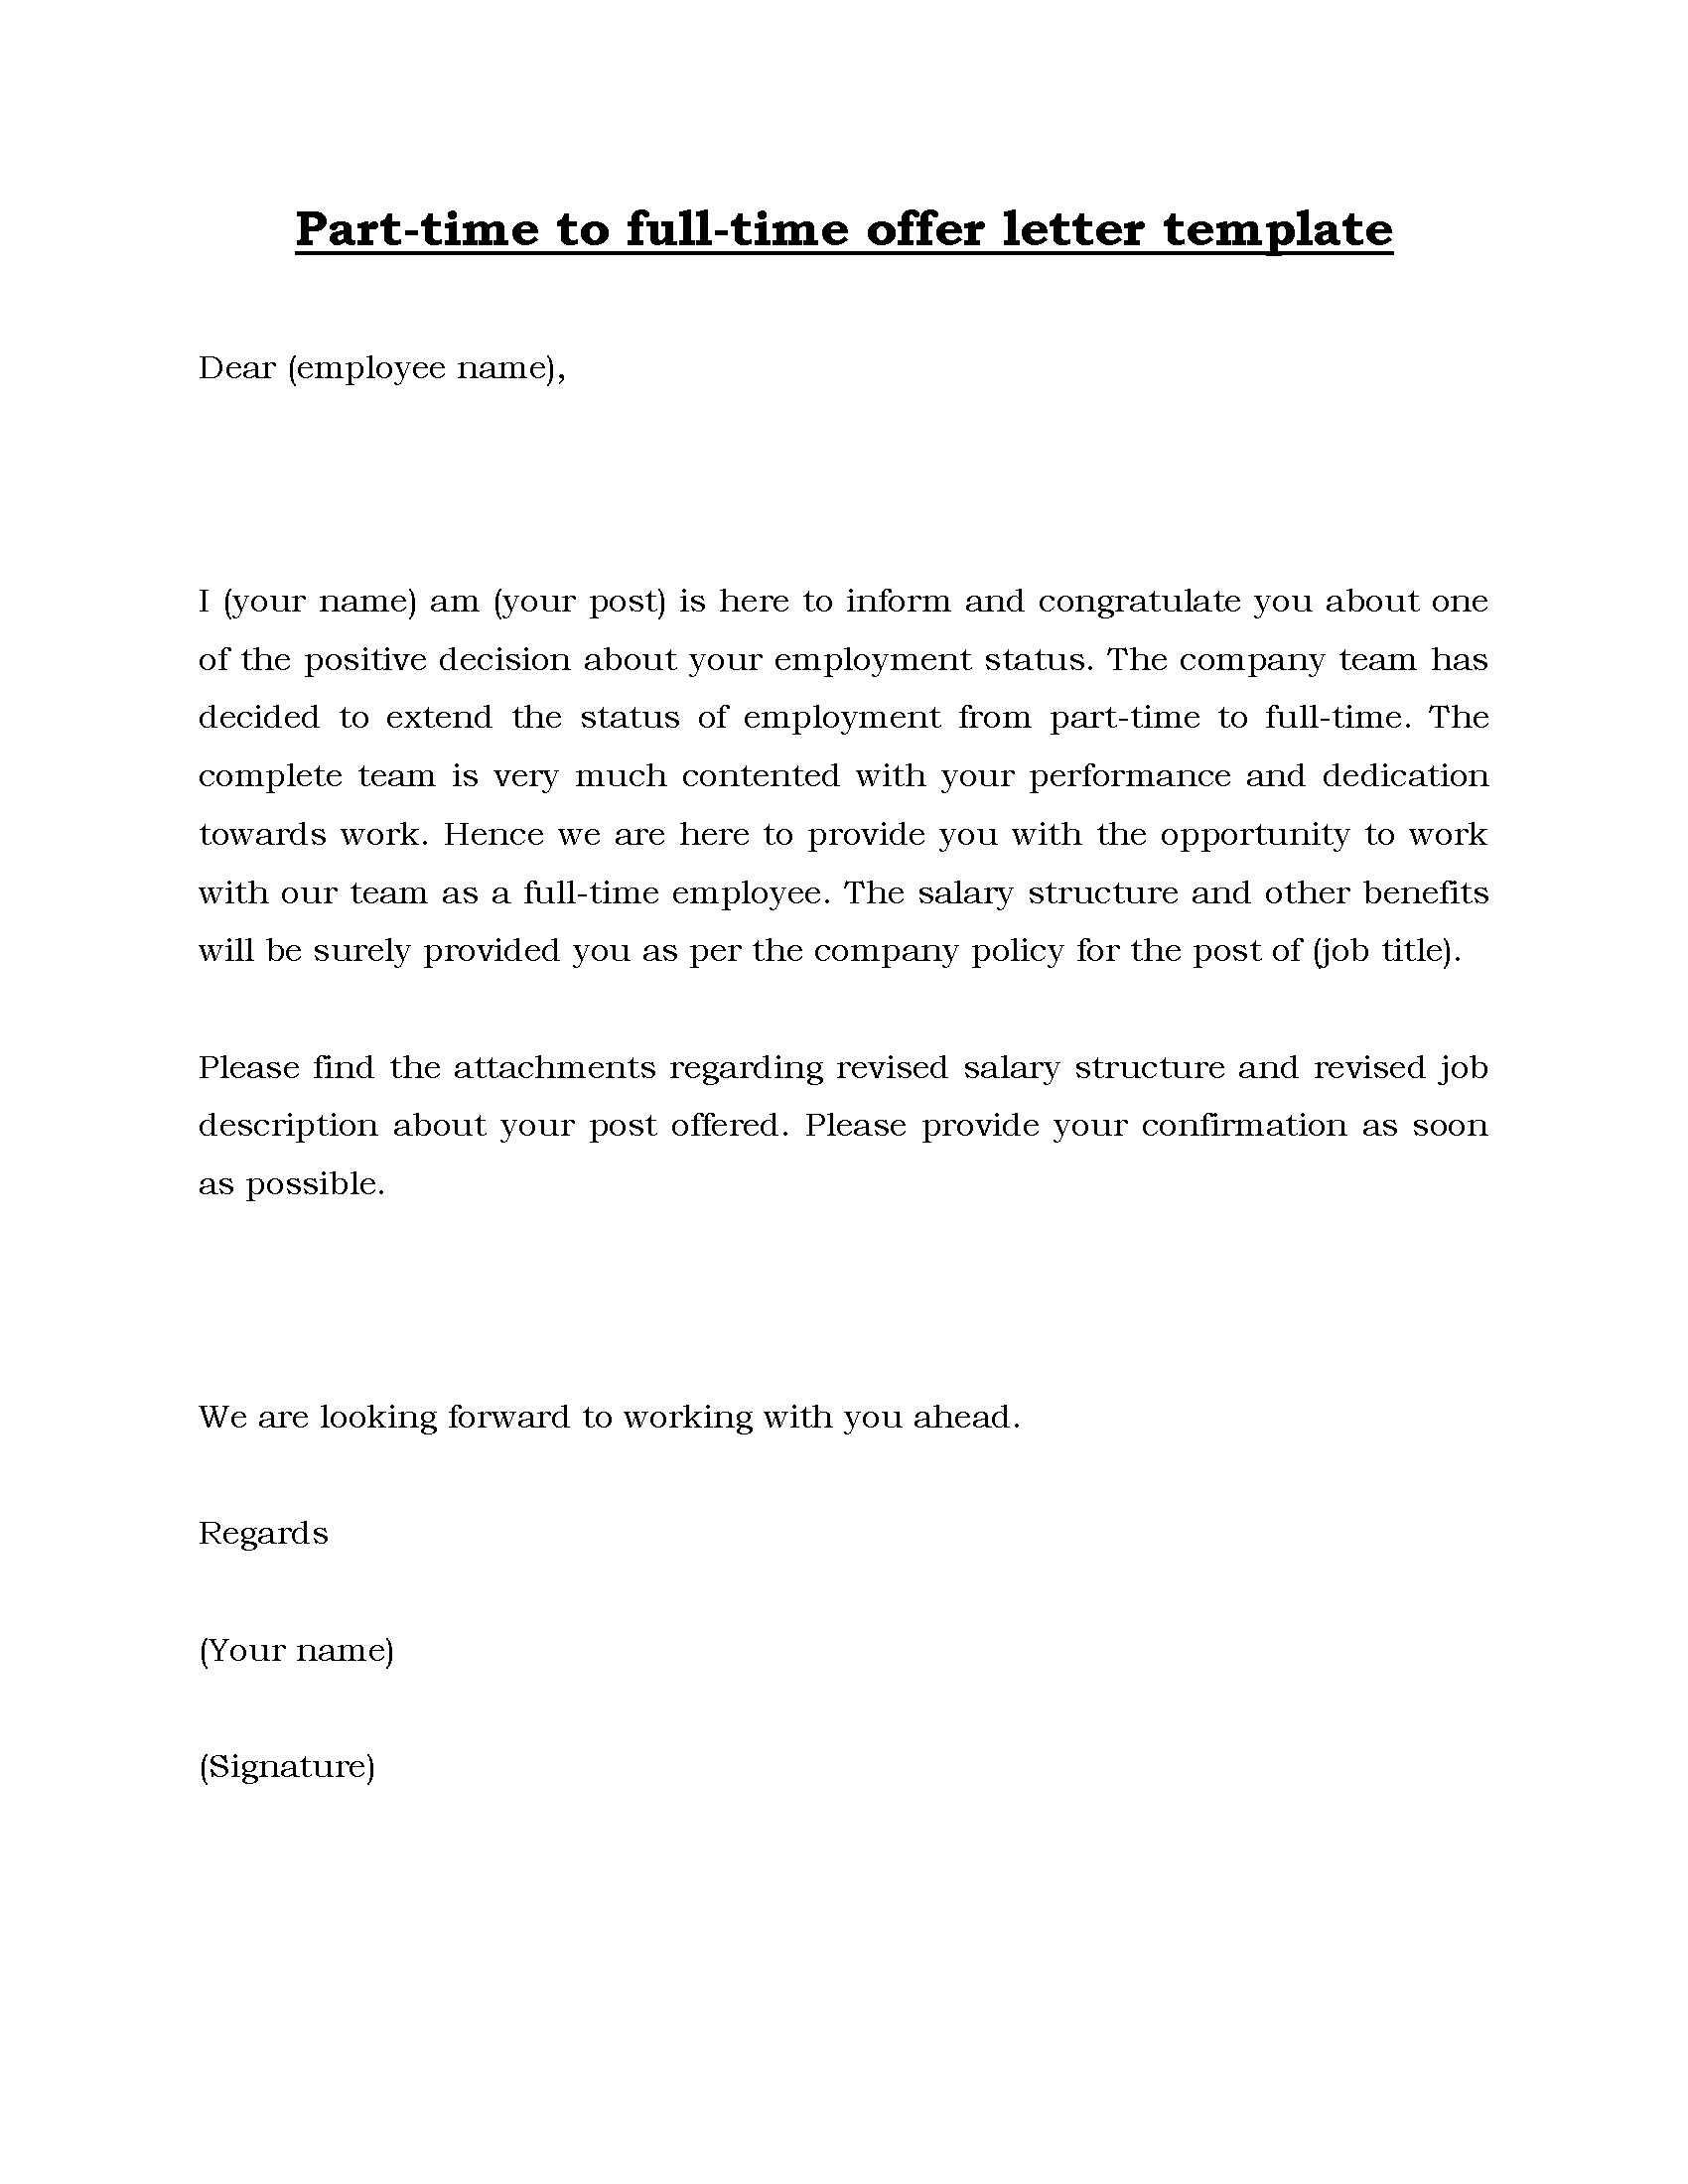 09- Part-time-to-full-time-offer-letter-template